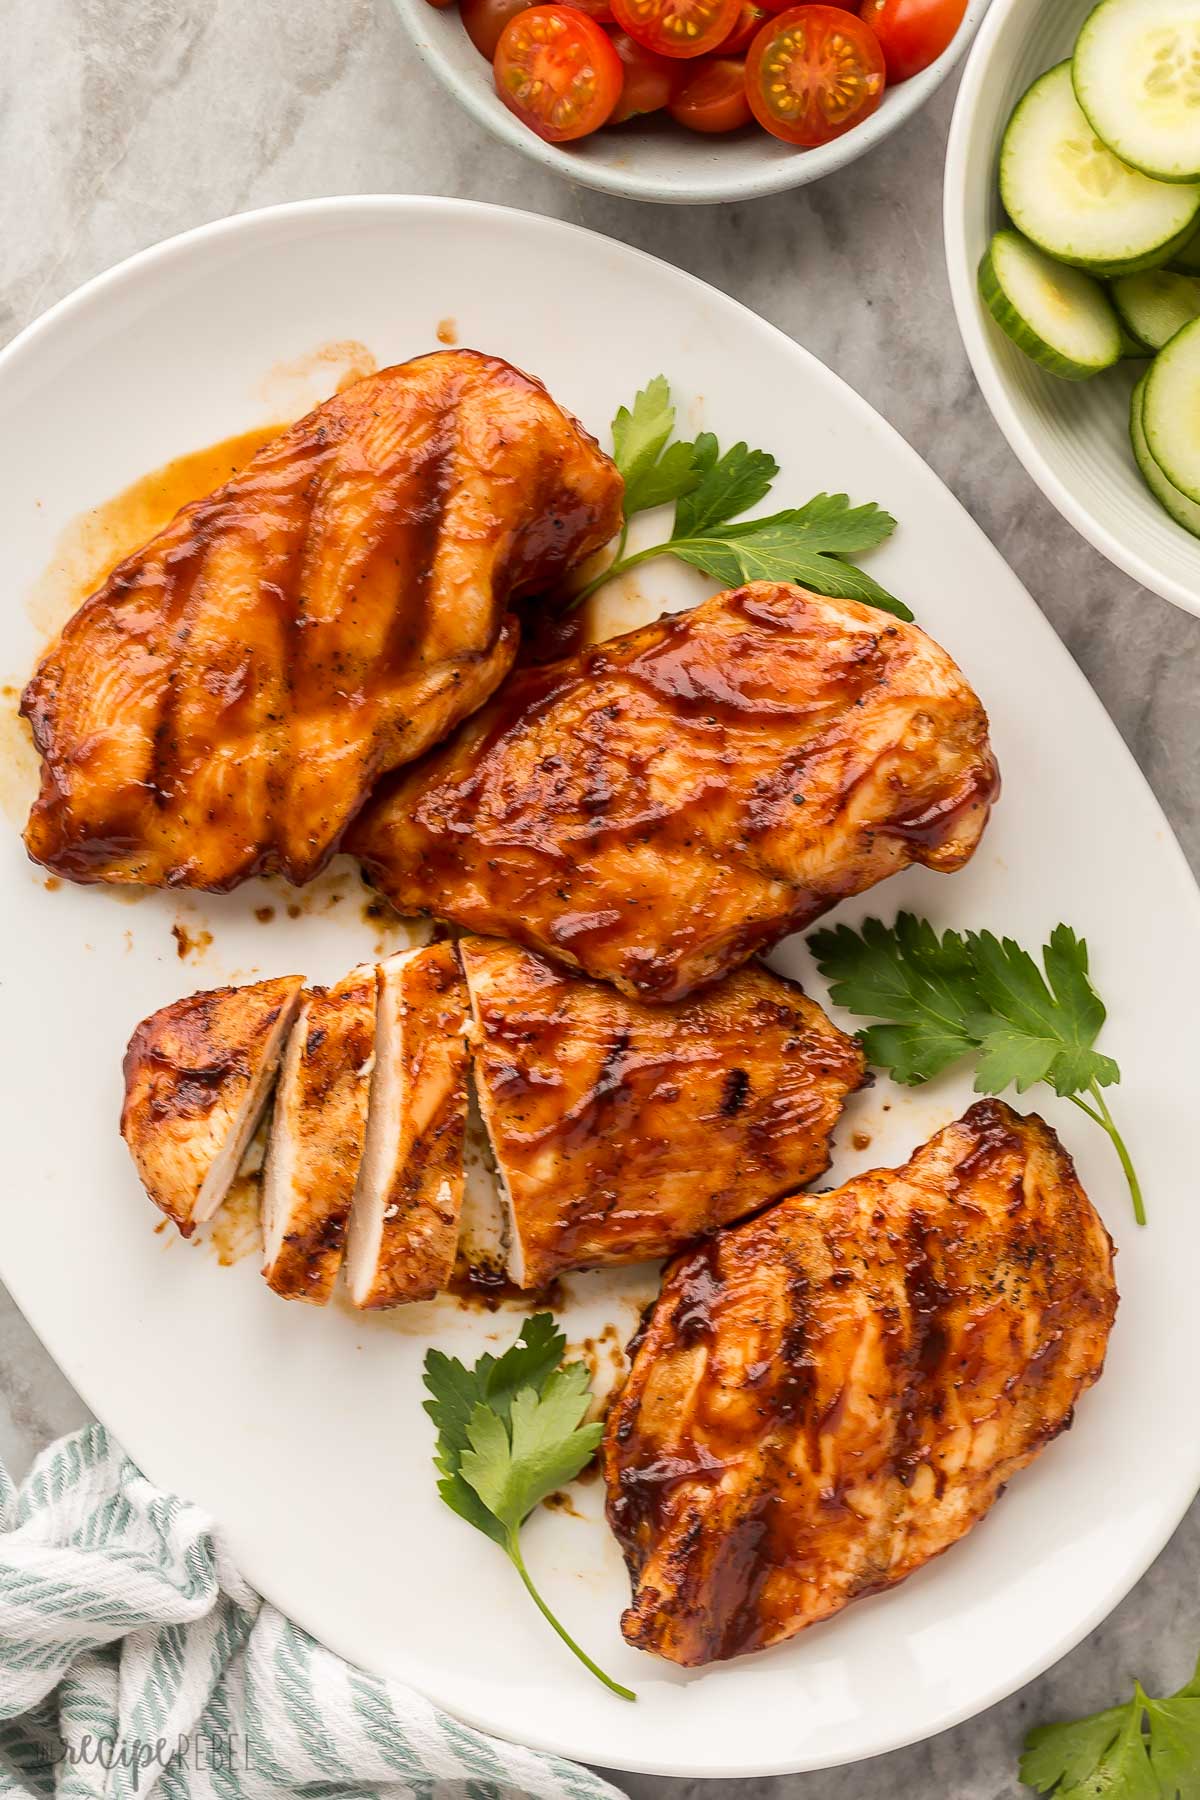 How Do You Brine Chicken Breast For Grilling?